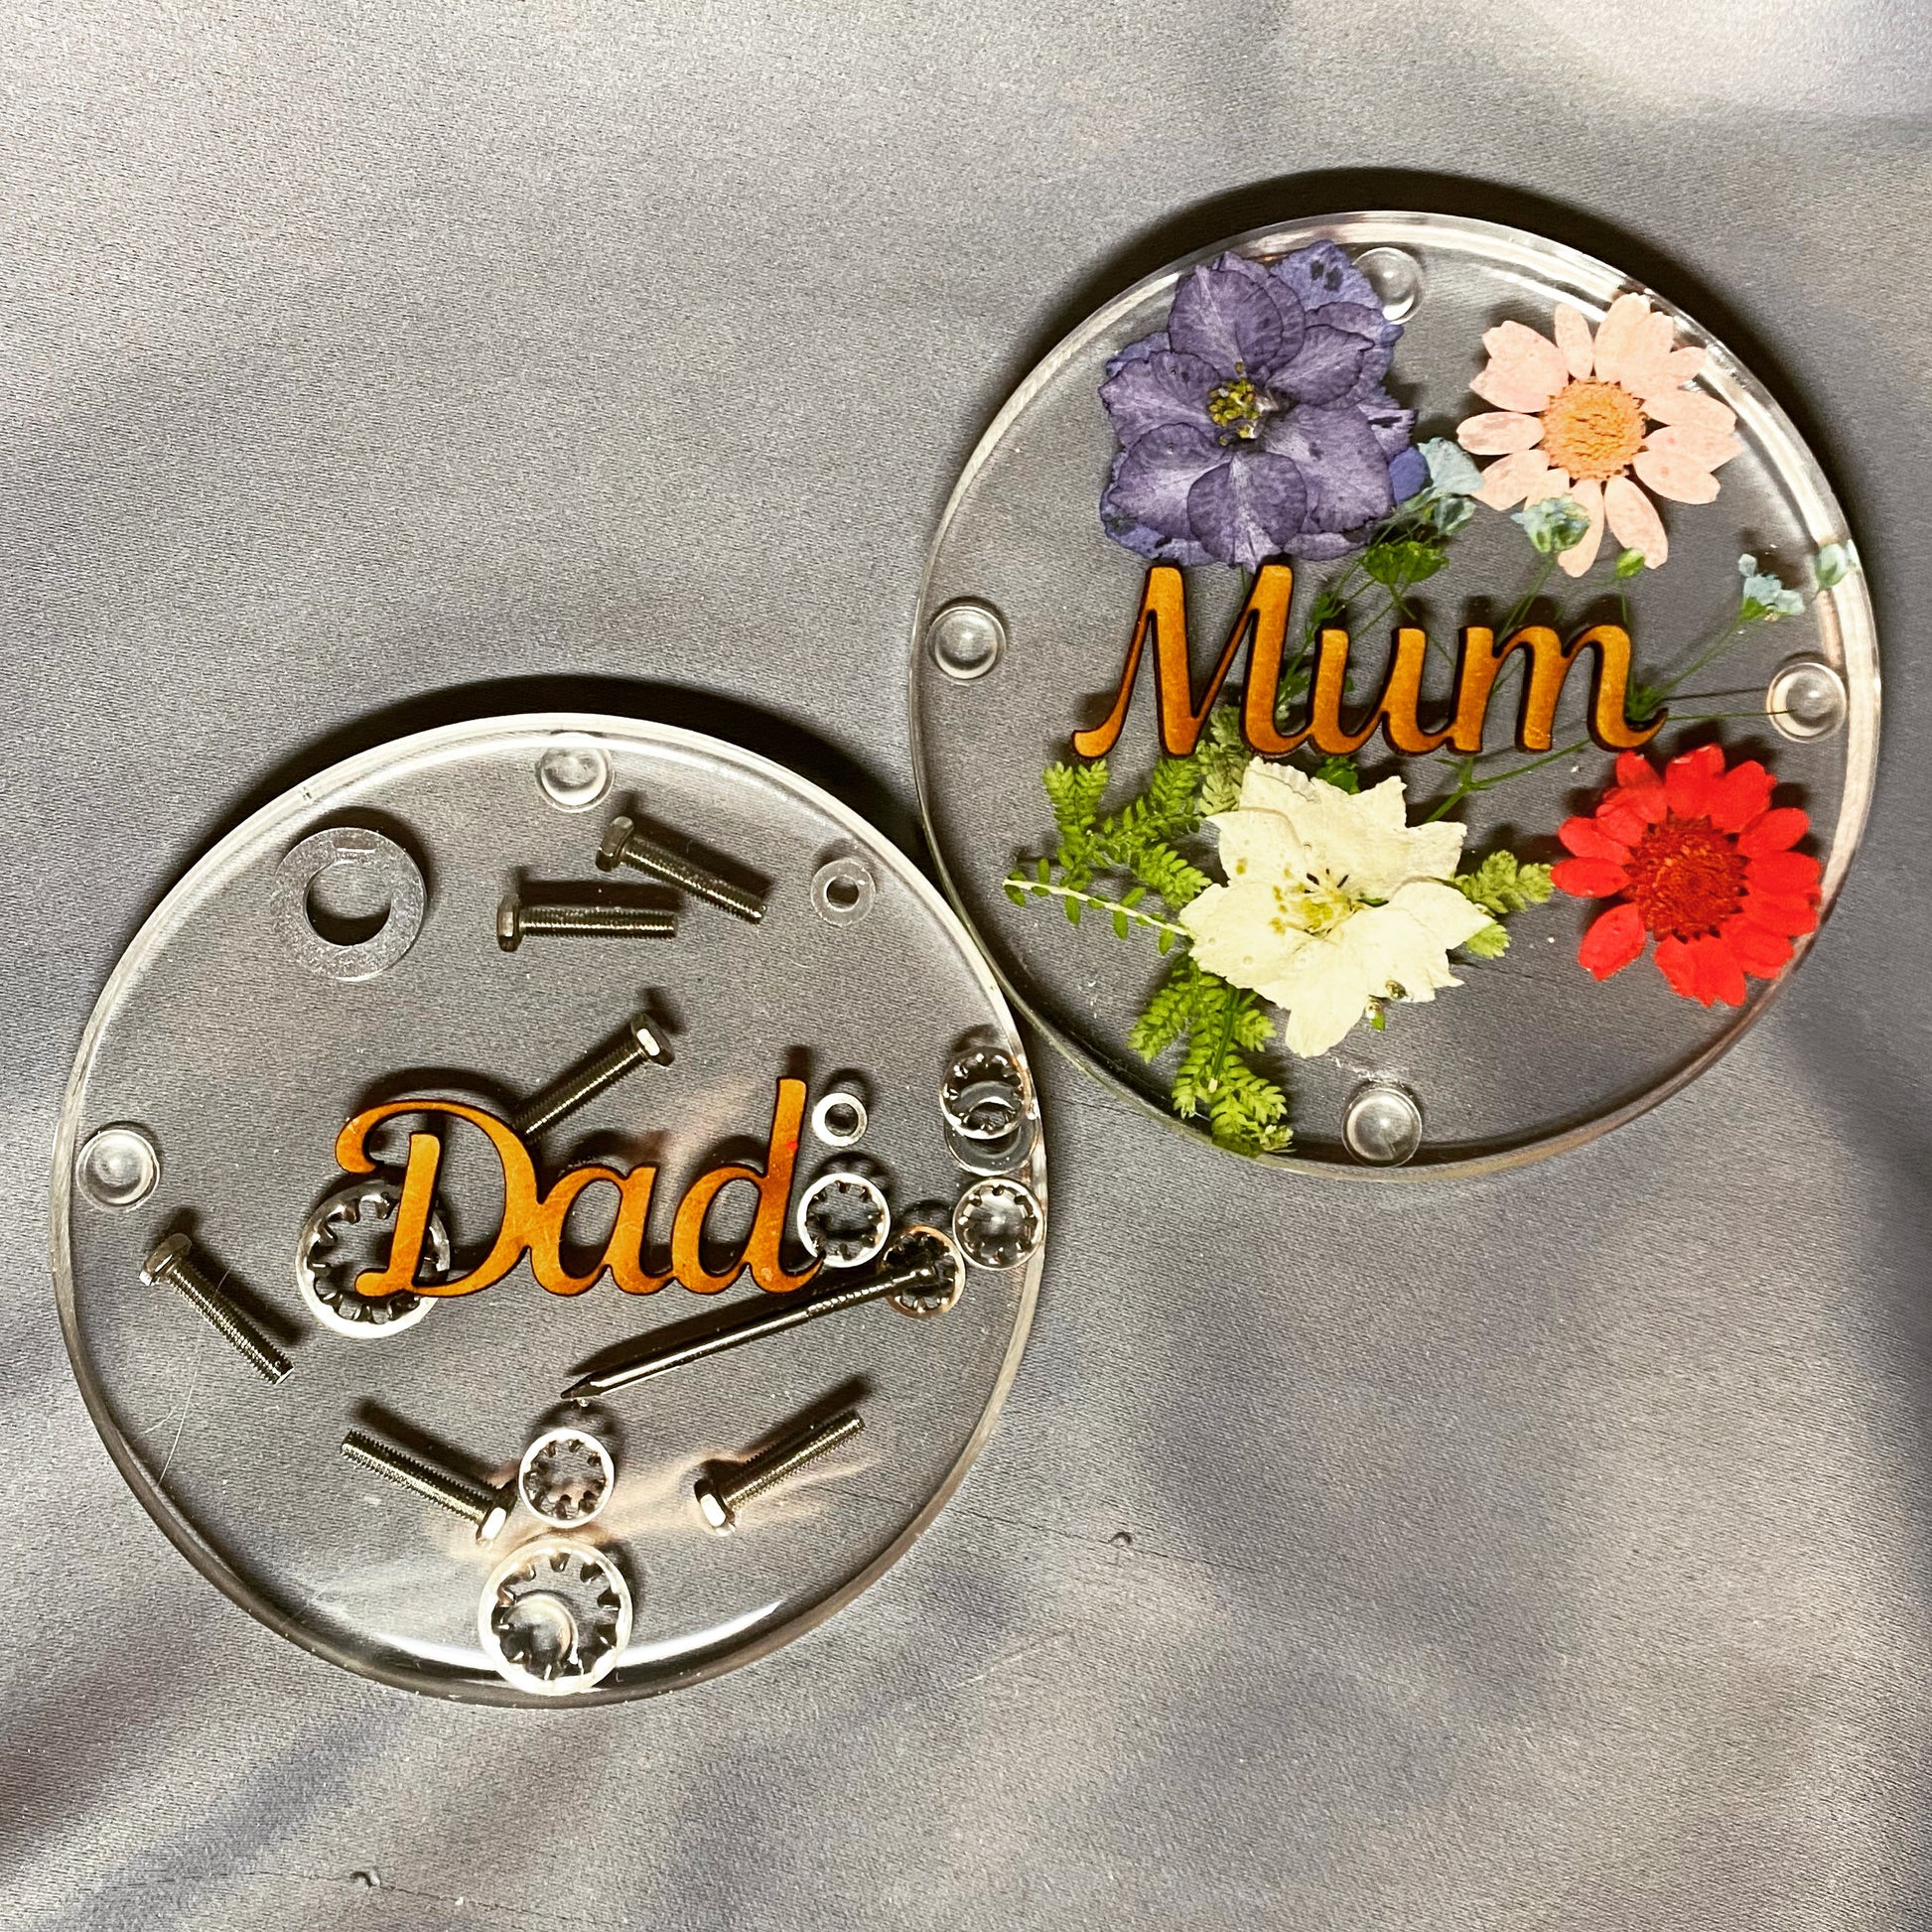 womens floral coaster, flower coaster, personalised coaster featuring a sepection of flowers, foliage and name of your choice, nut and bolt dad coaster and floral mum coaster